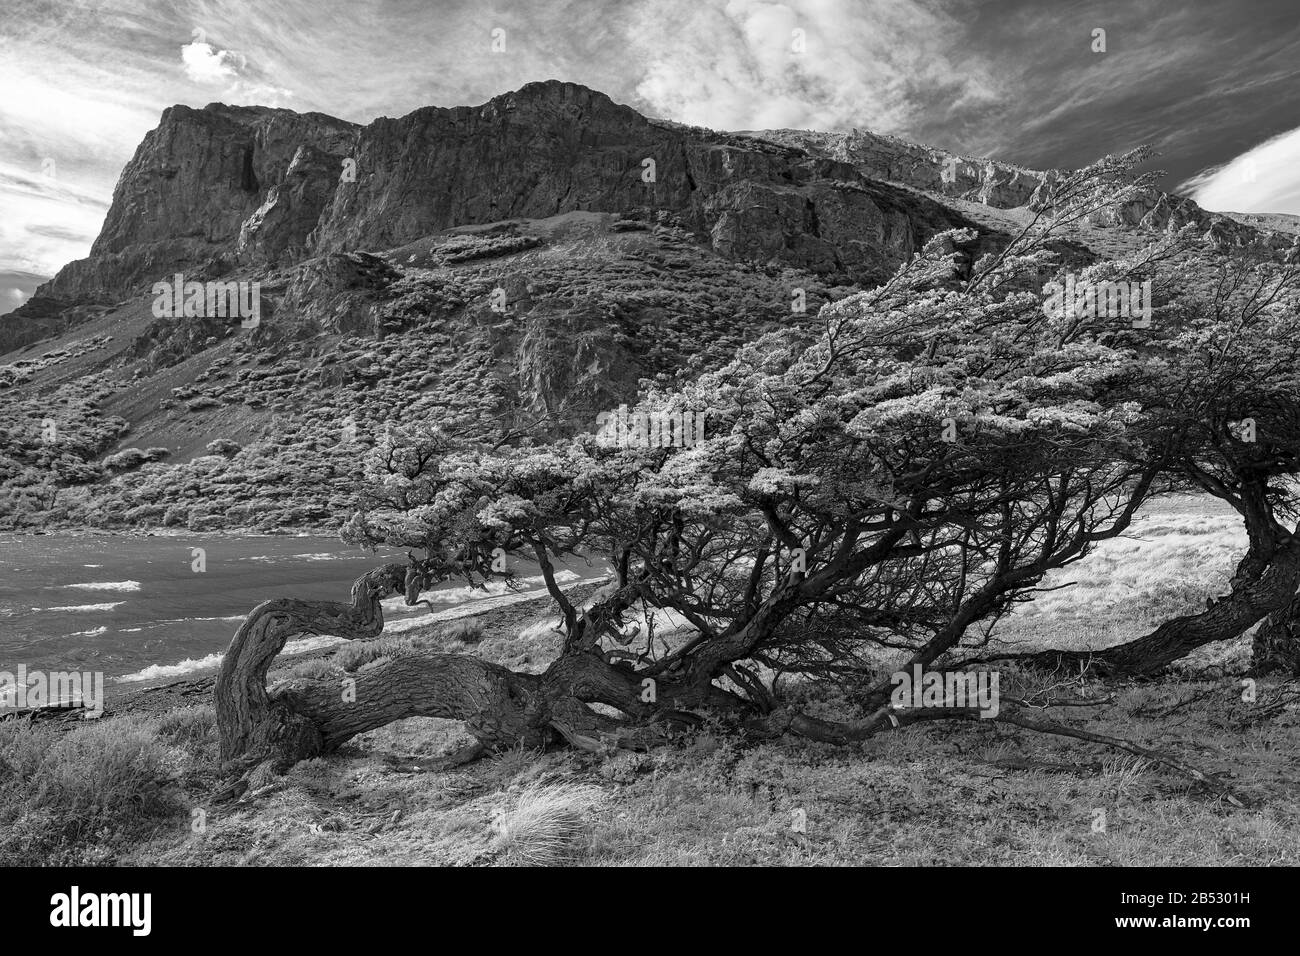 A tree grows despite the extremely rapid winds that have bent to the ground throughout its life, Parque Nacional Perito Moreno, Patagonia Argentina Stock Photo